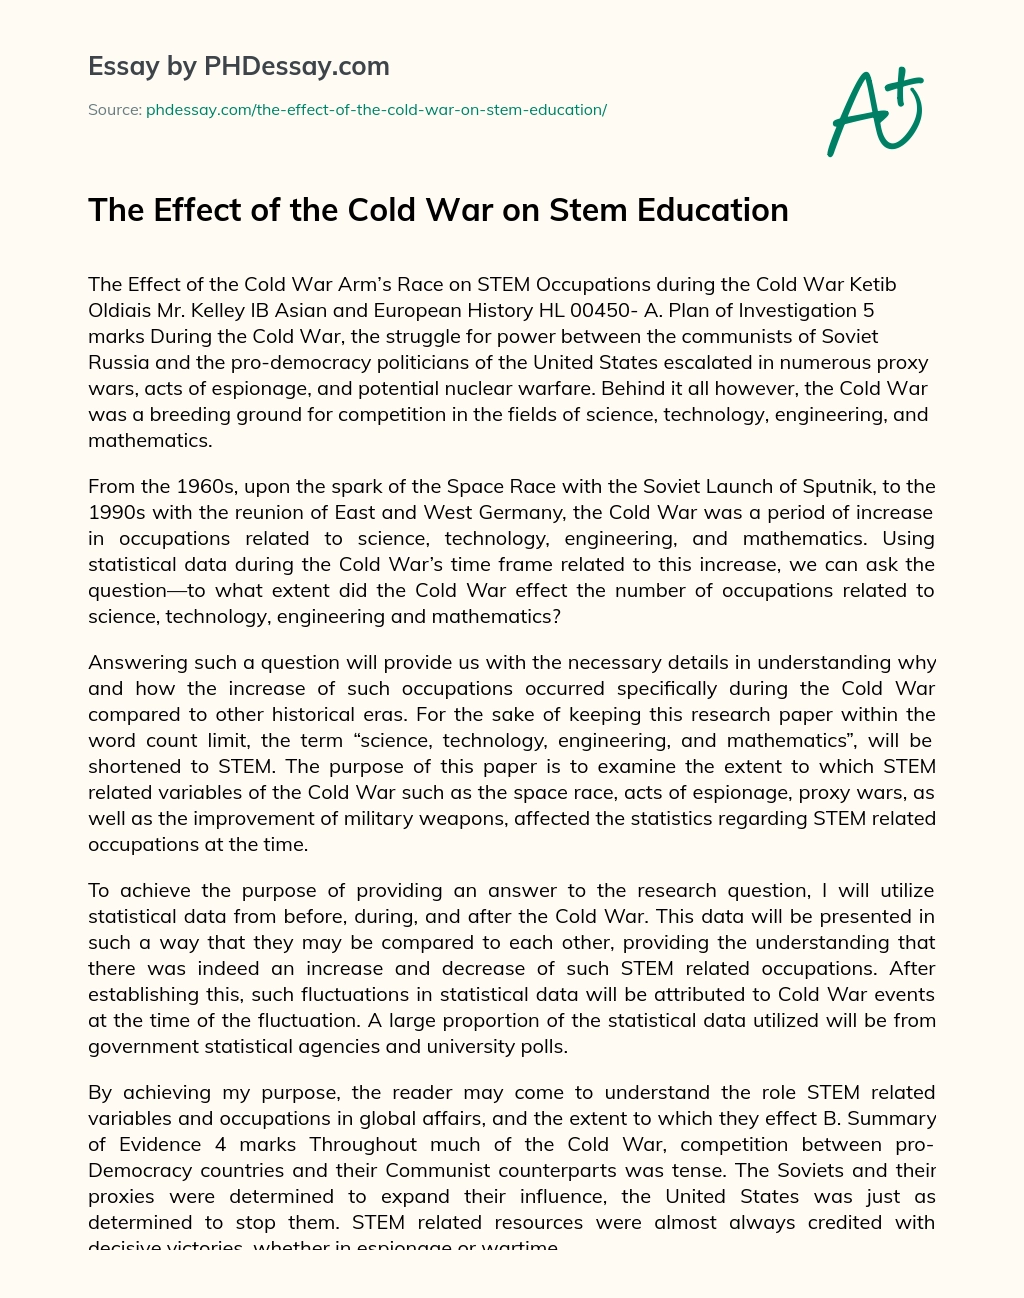 The Effect of the Cold War on Stem Education essay